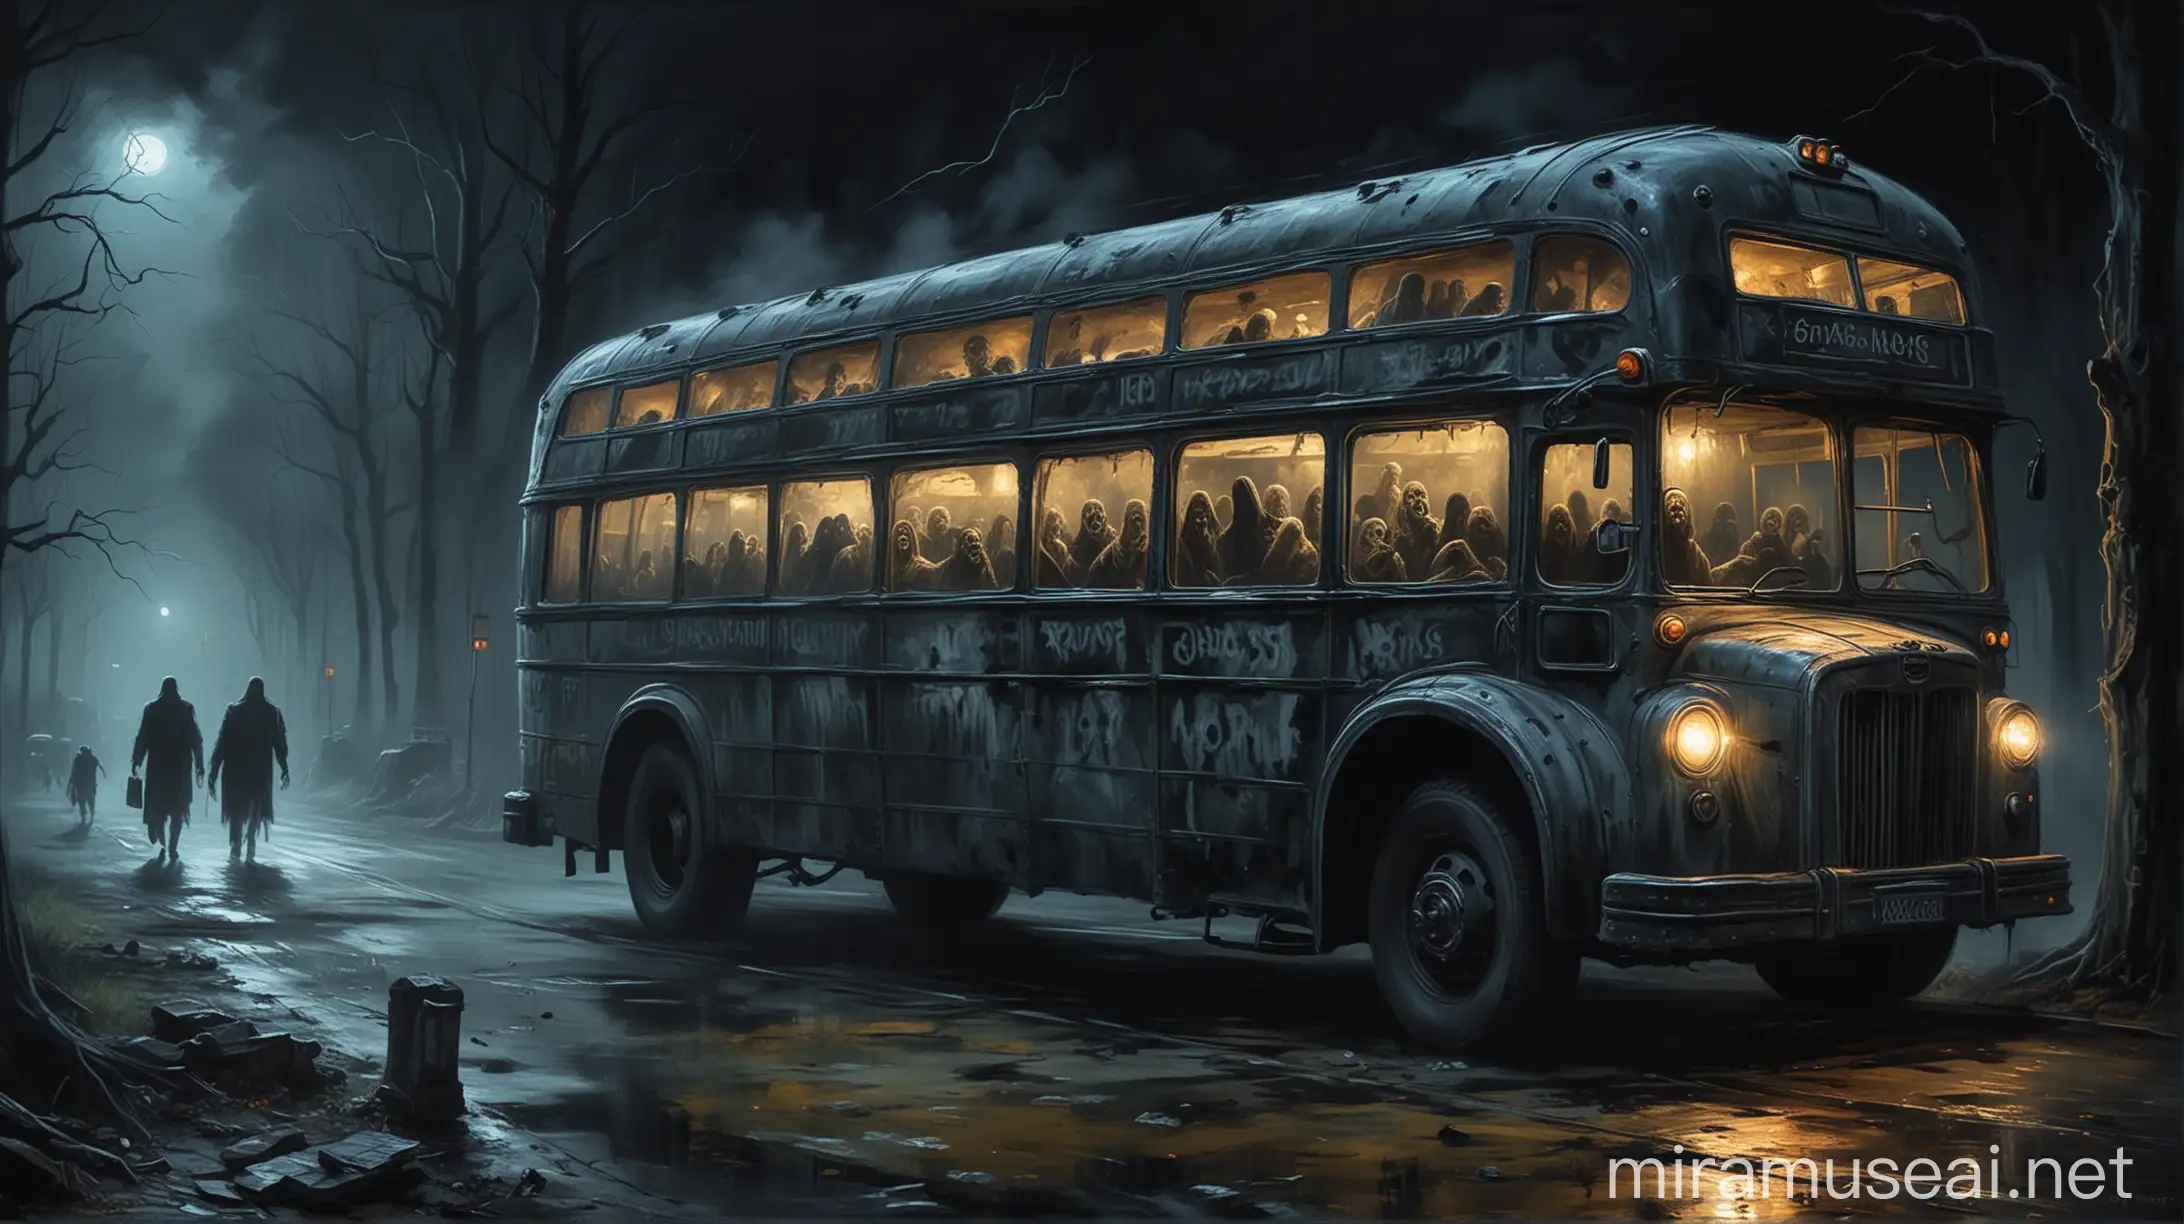 Eerie Night Encounter Haunted Bus with Ghostly Passengers